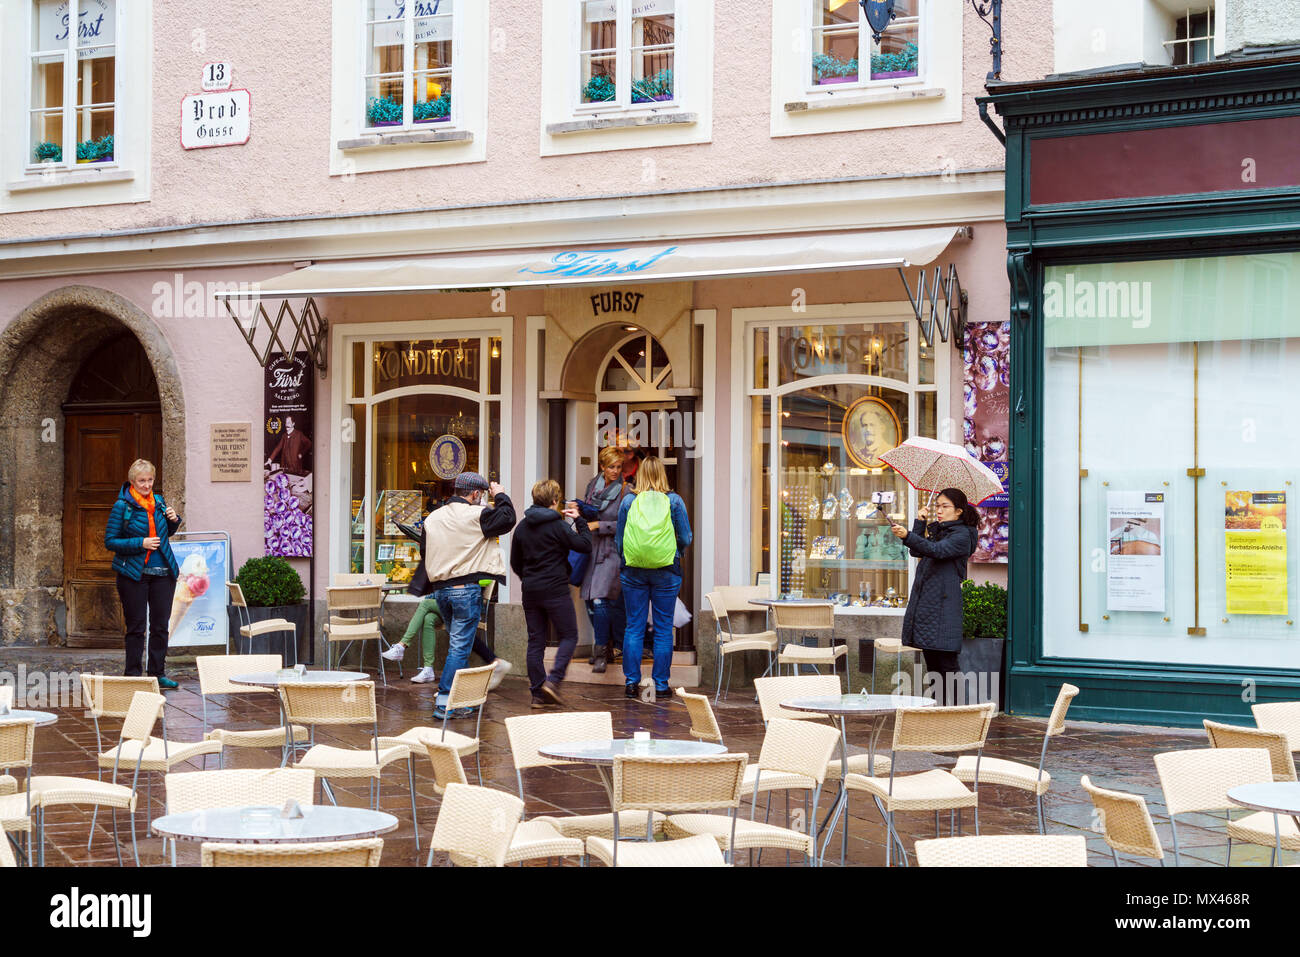 Salzburg, Austria - October 21, 2017: People come in and out of the famous cafe confectionery Furst Stock Photo